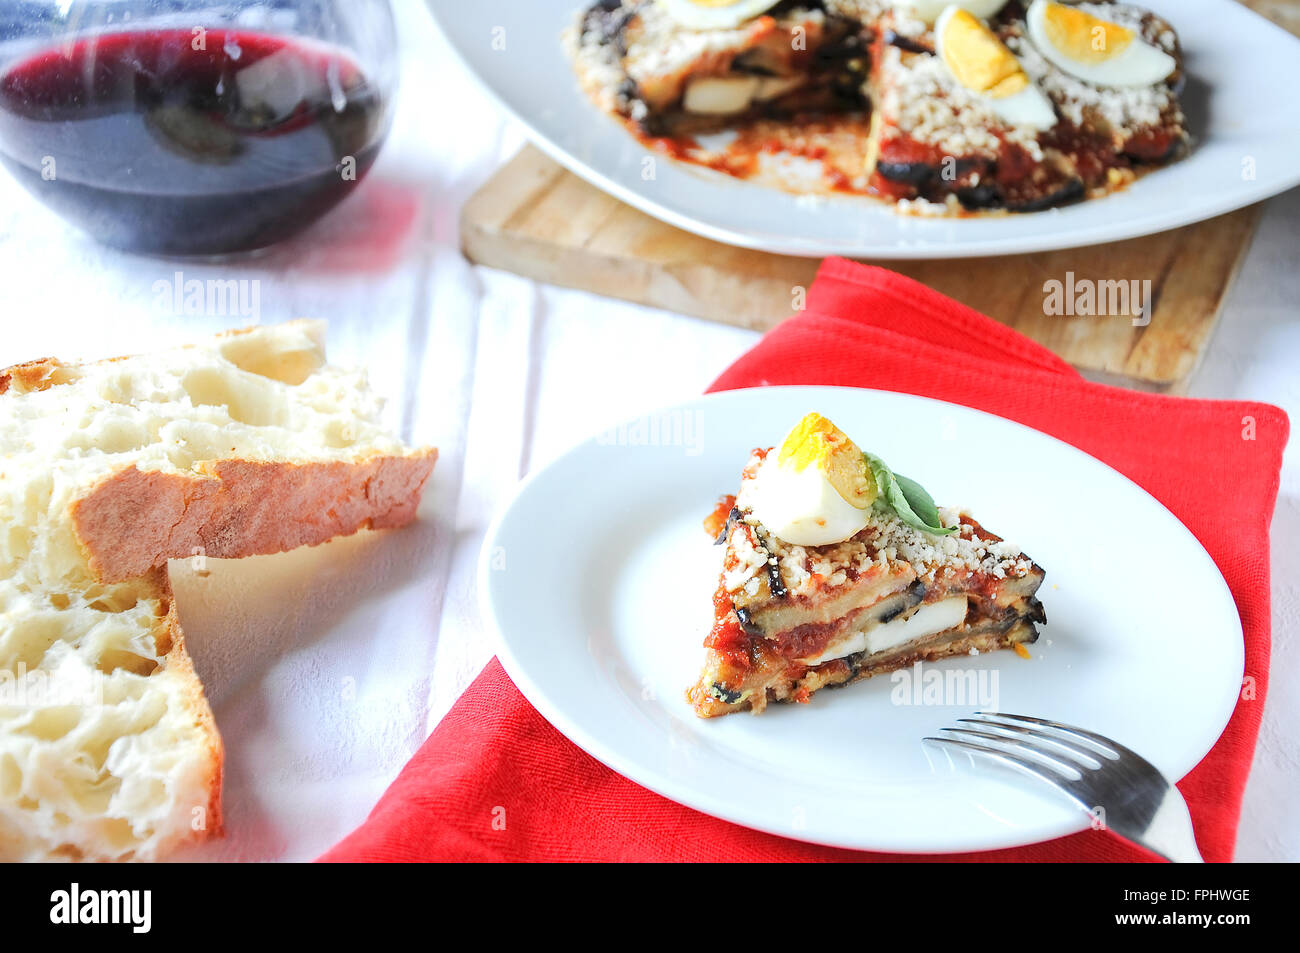 Parmigiana a typical Italian dish with eggplant Stock Photo